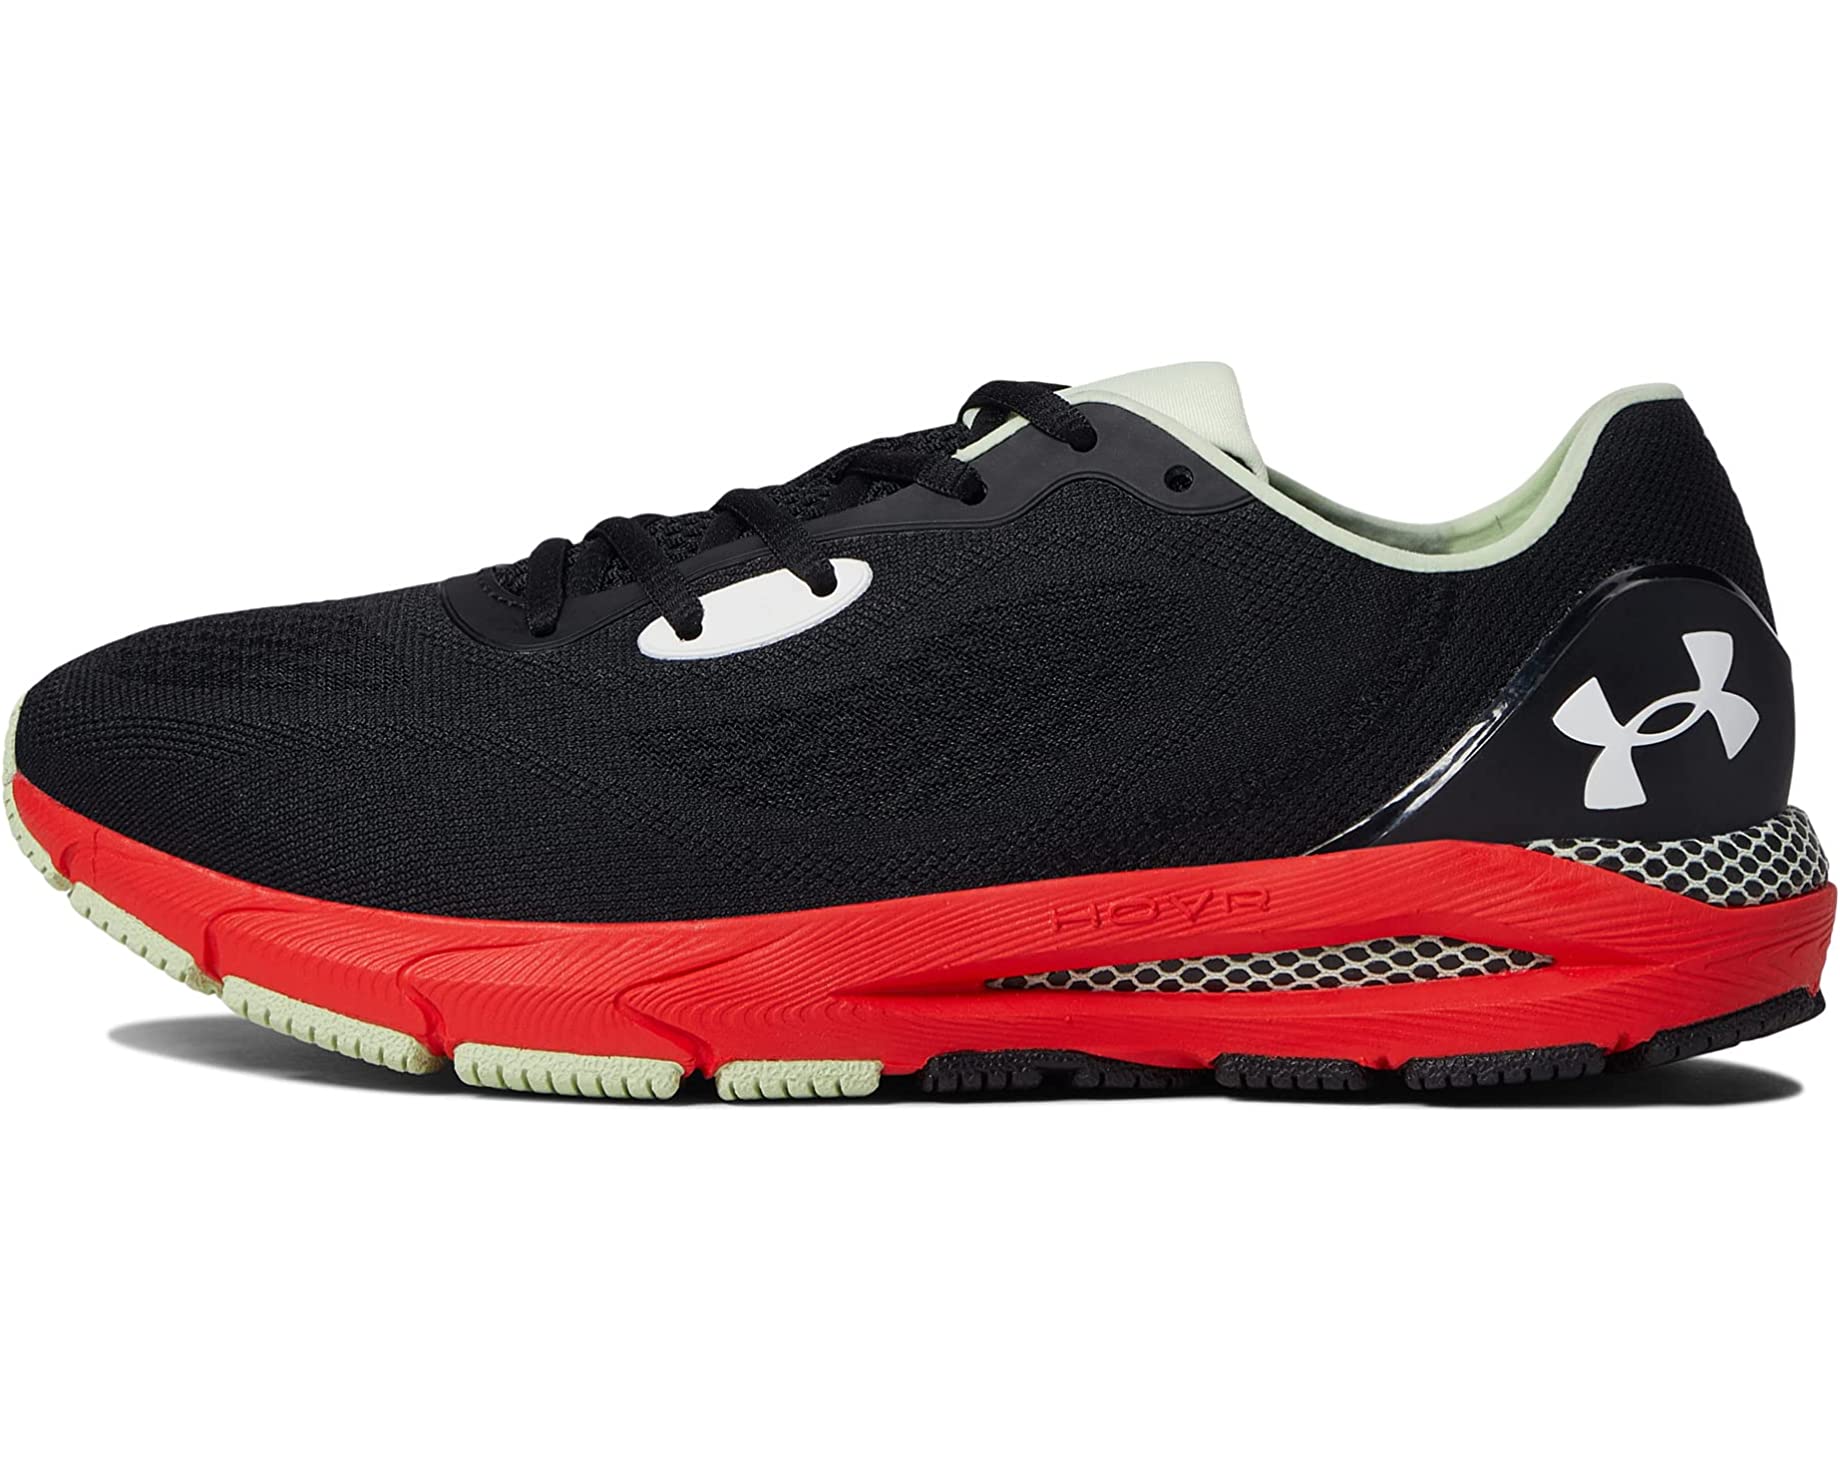 Under Armour Men's HOVR Sonic 5 Shoes (Black/Black/White) $44.19 + Free Shipping